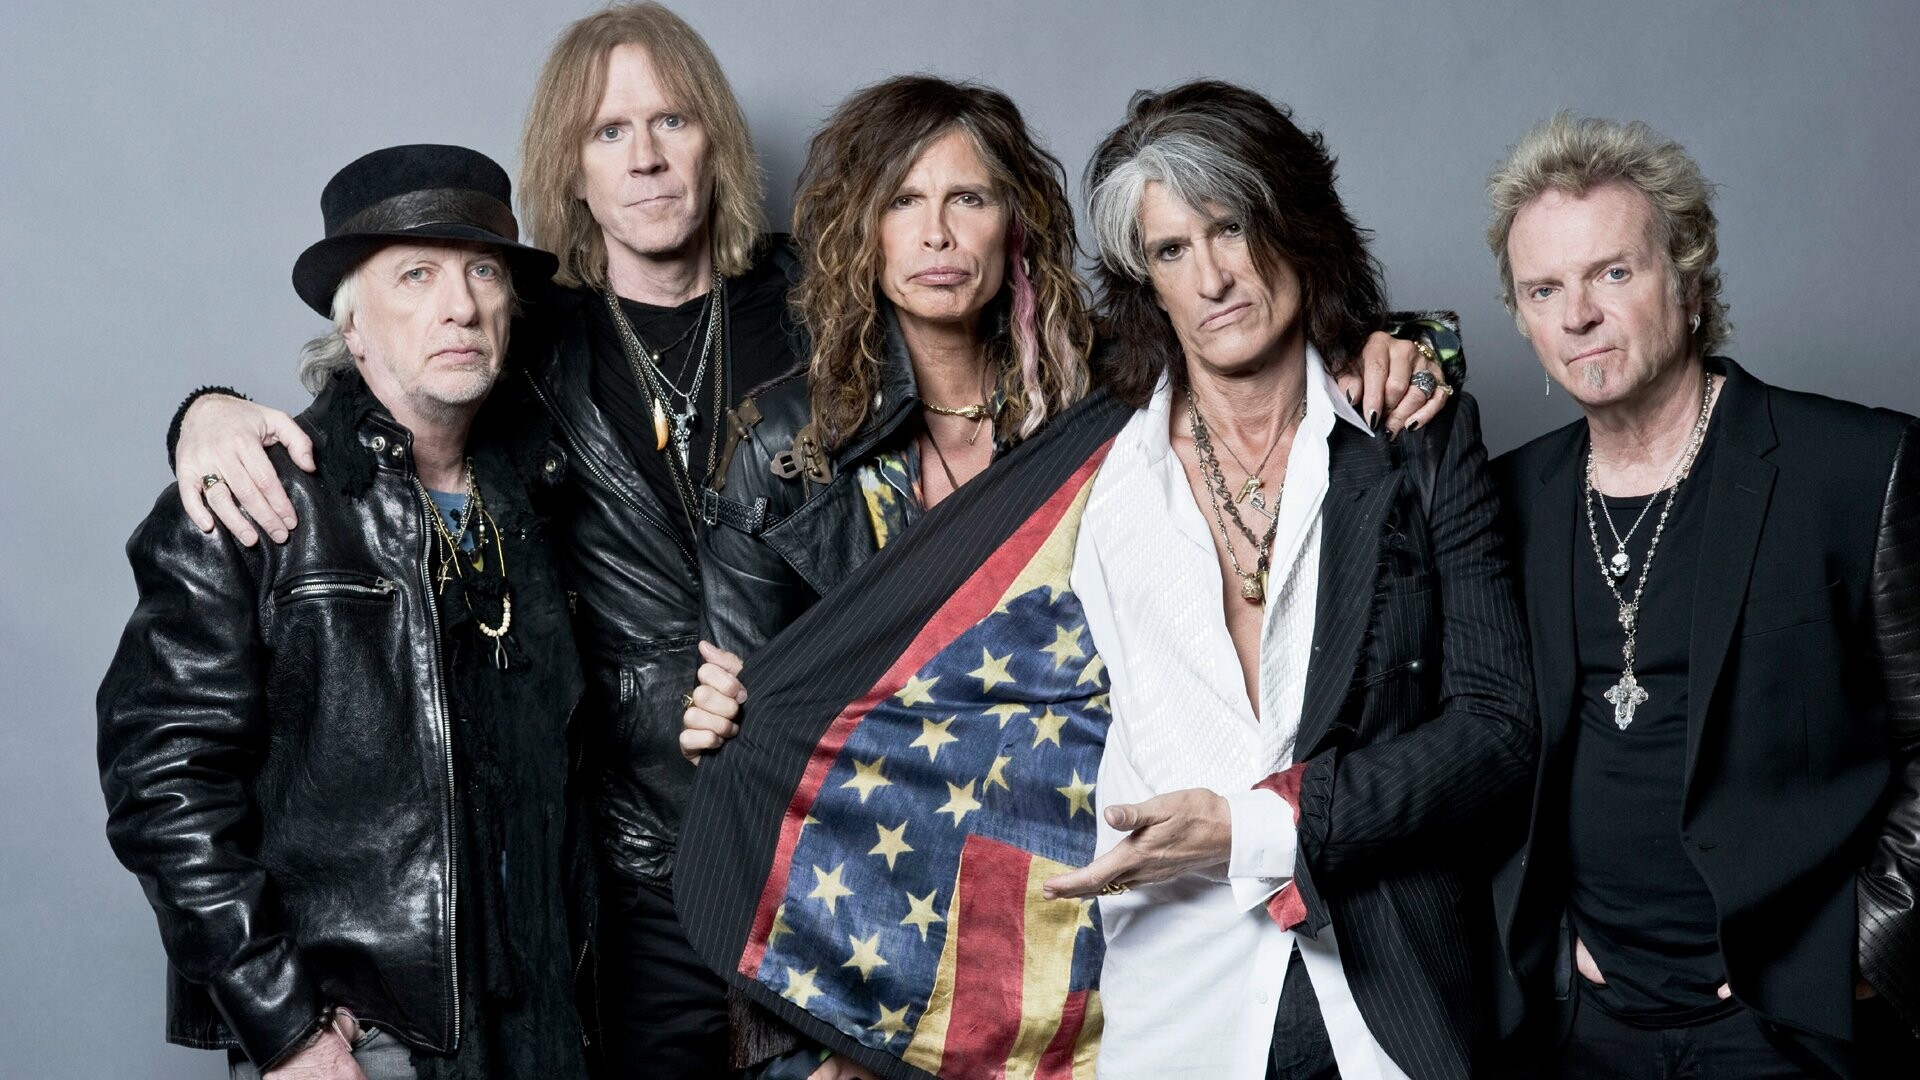 Aerosmith: The thirteenth studio album, Just Push Play, was released on March 6, 2001. 1920x1080 Full HD Background.